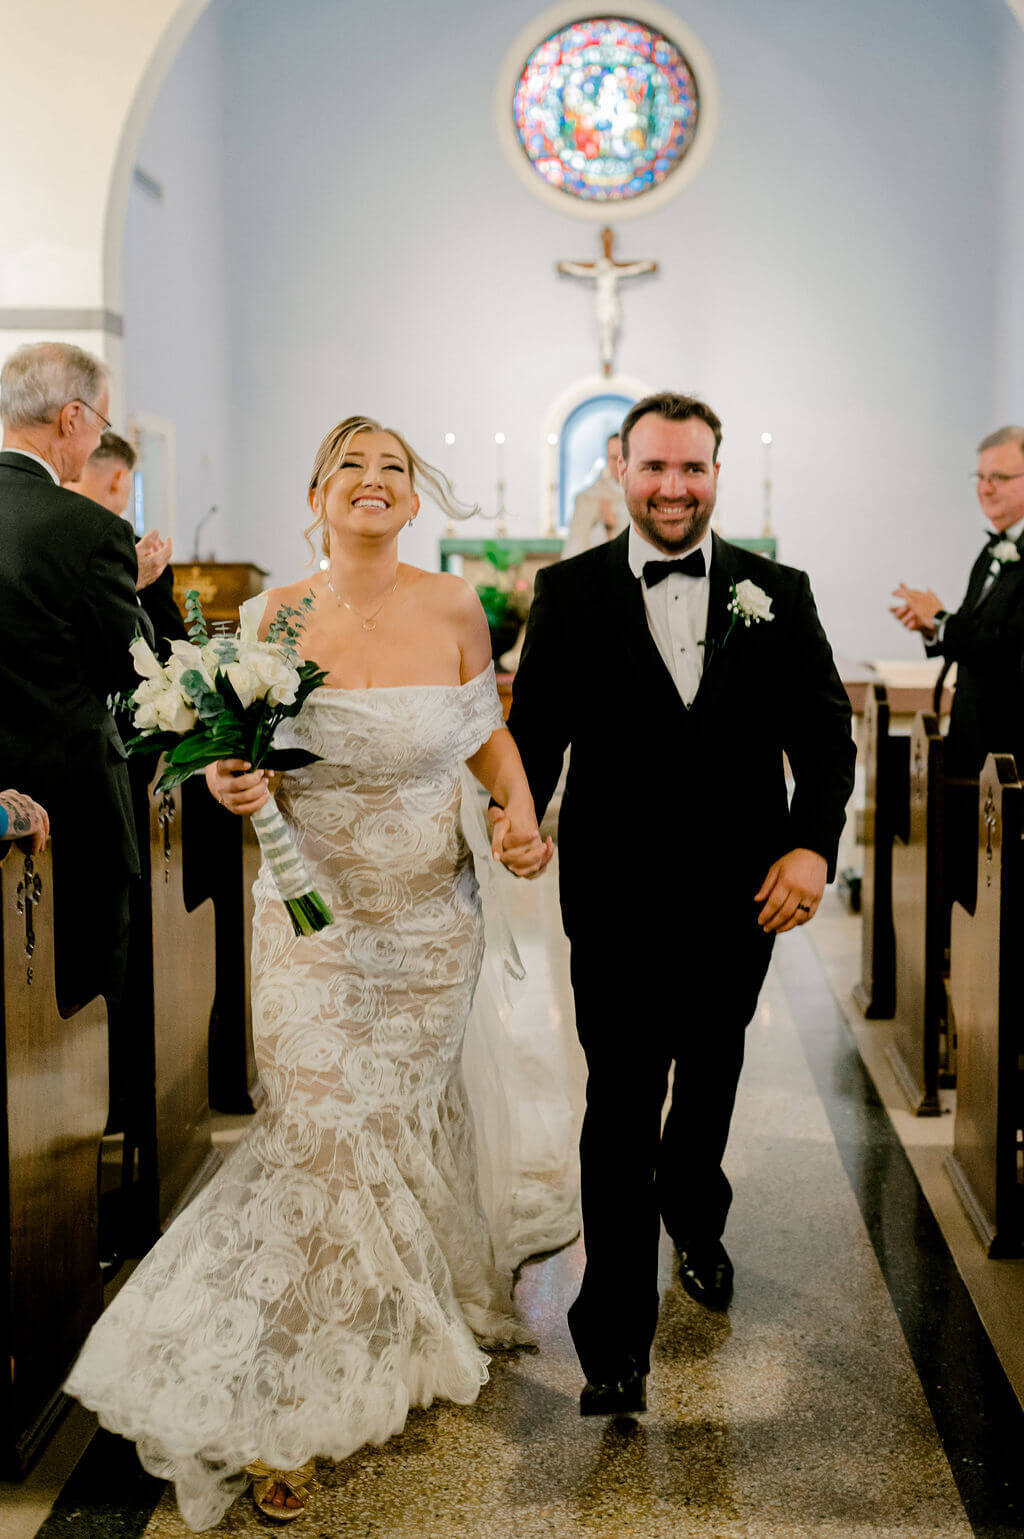 Bride and groom happily recessing up the aisle after being just married in a Catholic church in Georgetown